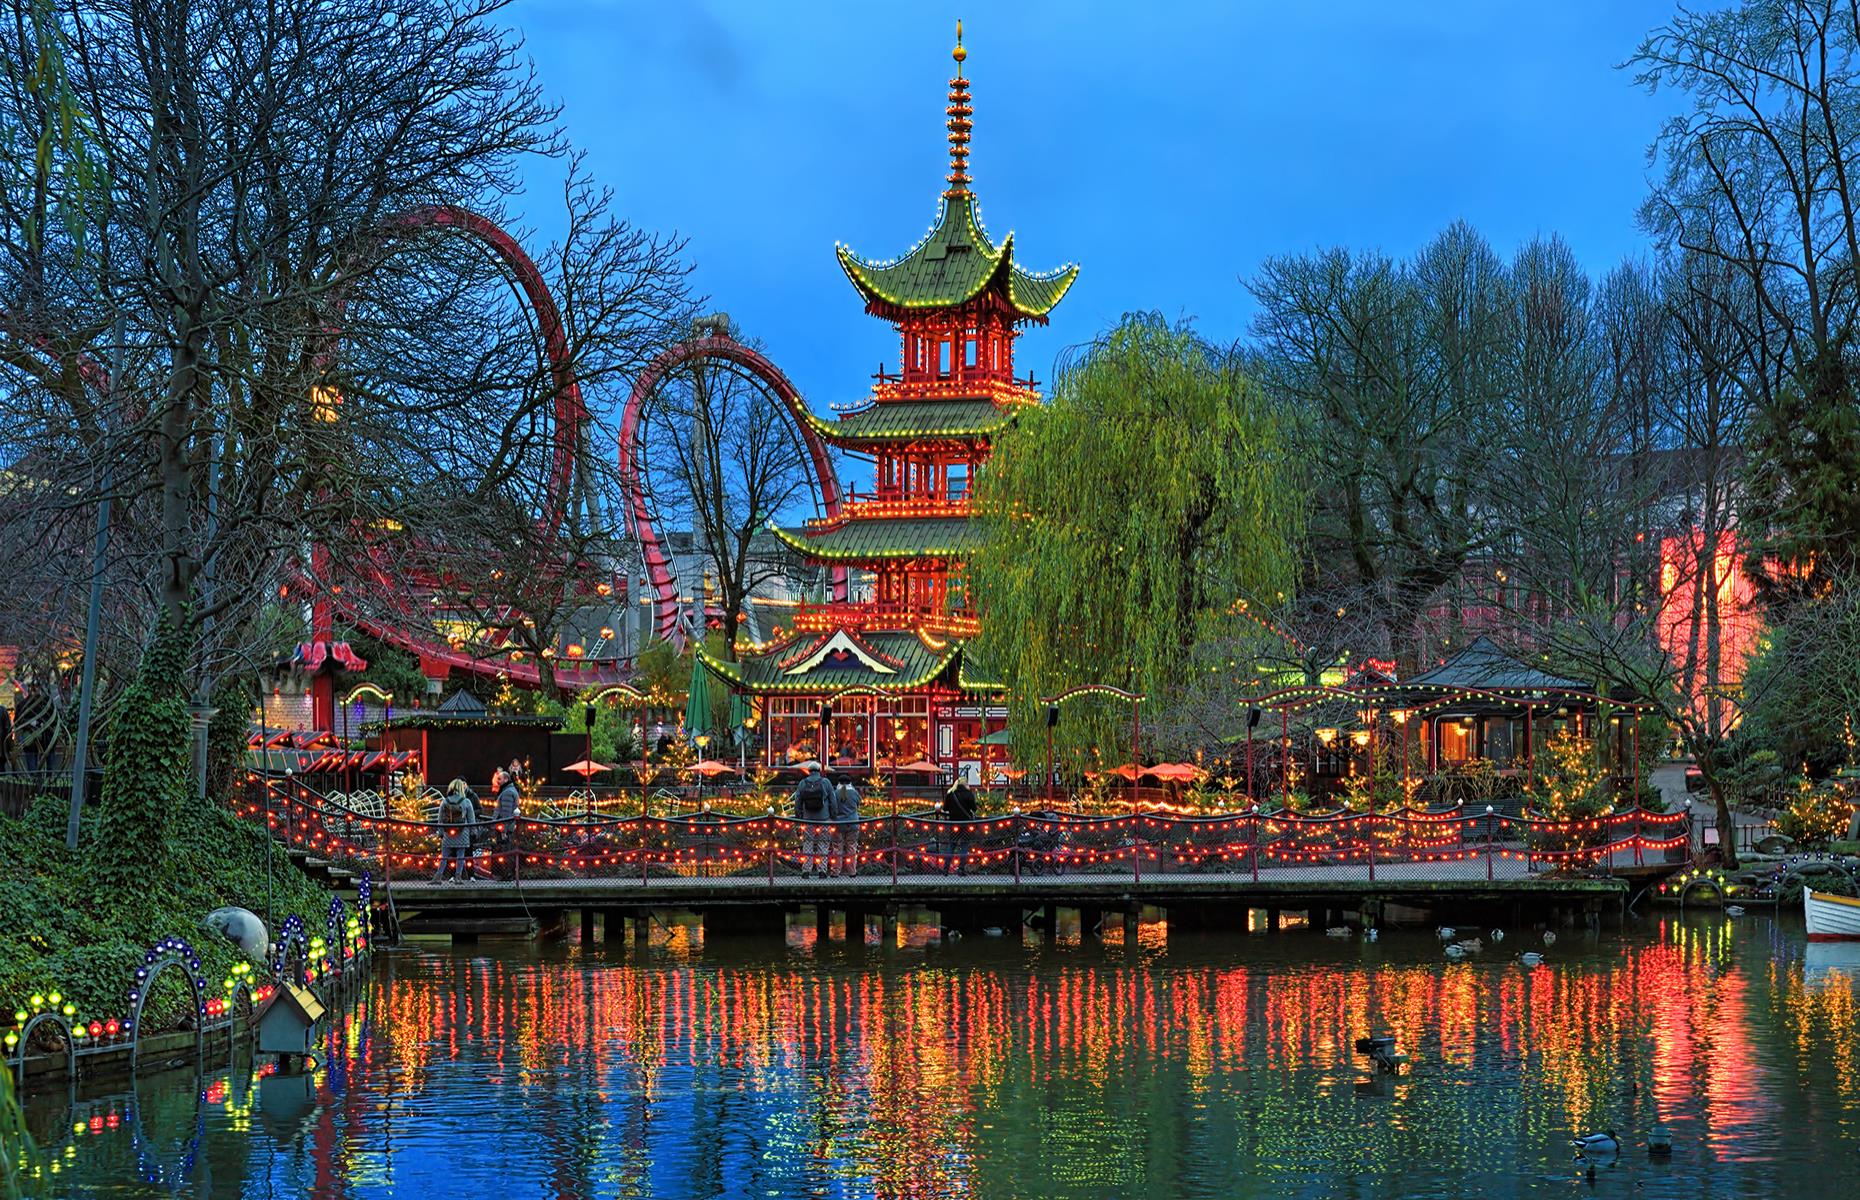 This elaborate amusement park in Copenhagen has been entertaining people of all ages since 1843. Old meets new: you’ll find a roller coaster from 1914 alongside scream-inducing The Demon with its three exhilarating loops. Discover the park's cultural side by taking in a ballet performance or watching a pop concert.